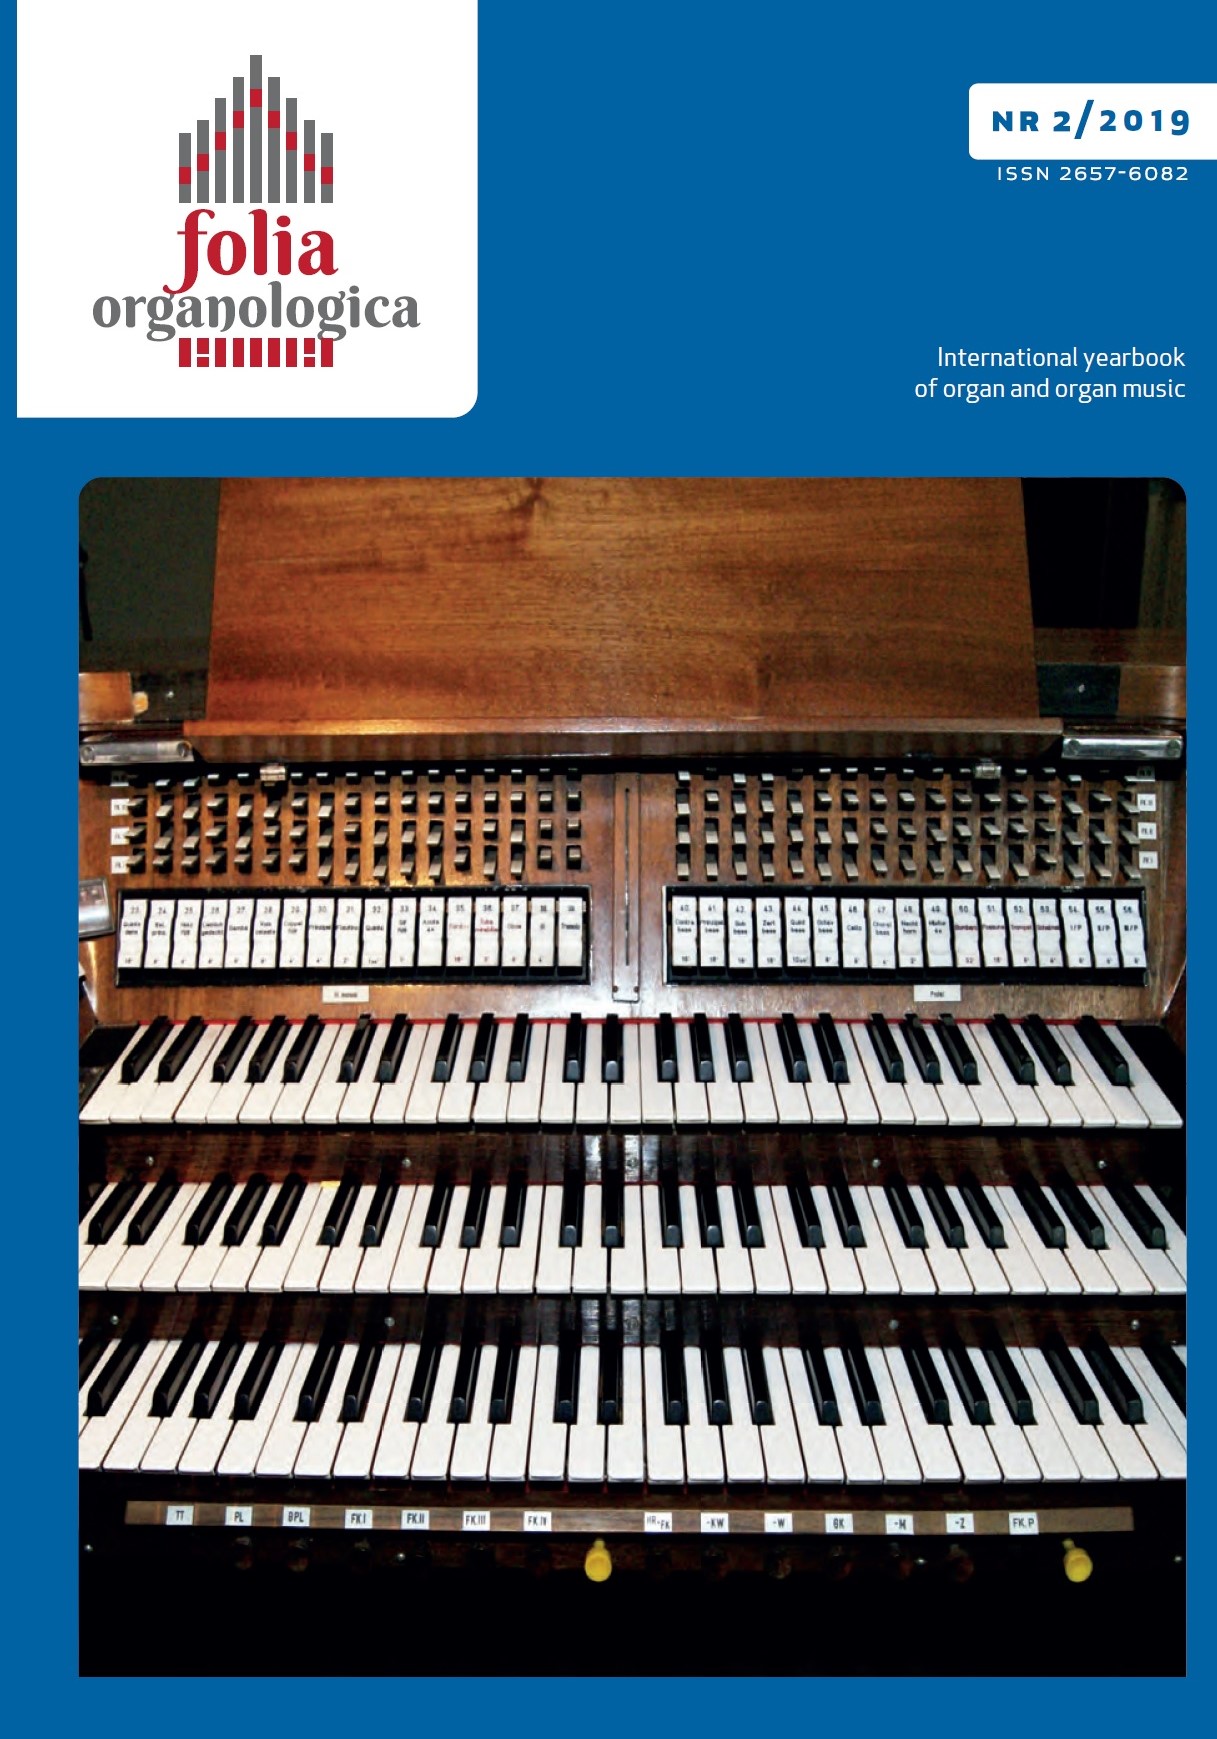 Discussion on the 24 and 25 albums from the series "Opole Silesia Organs Cover Image